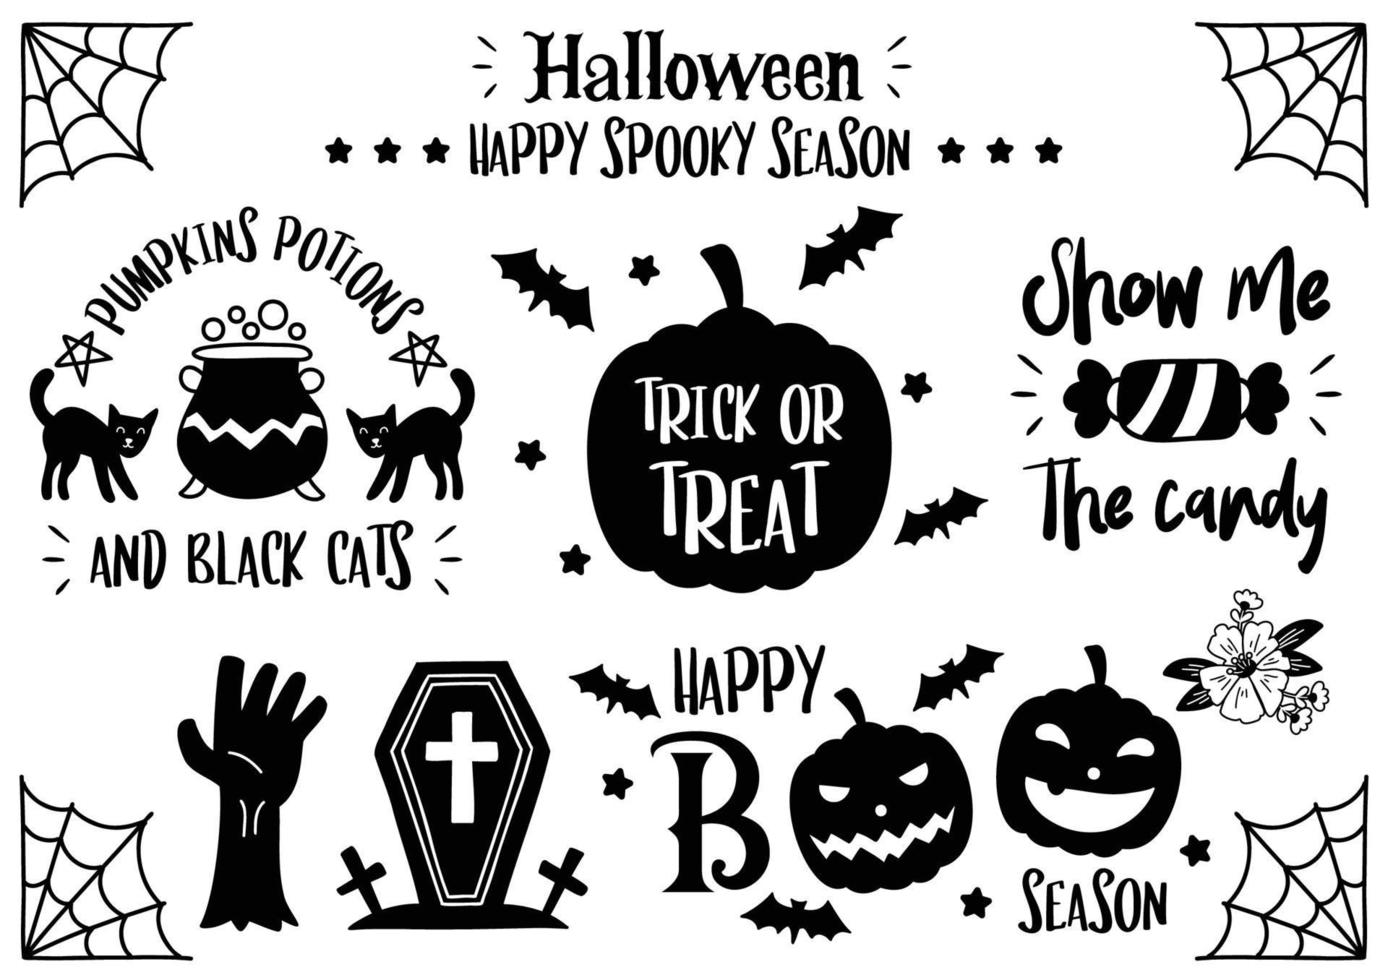 Magical halloween quote illustration Vector for banner